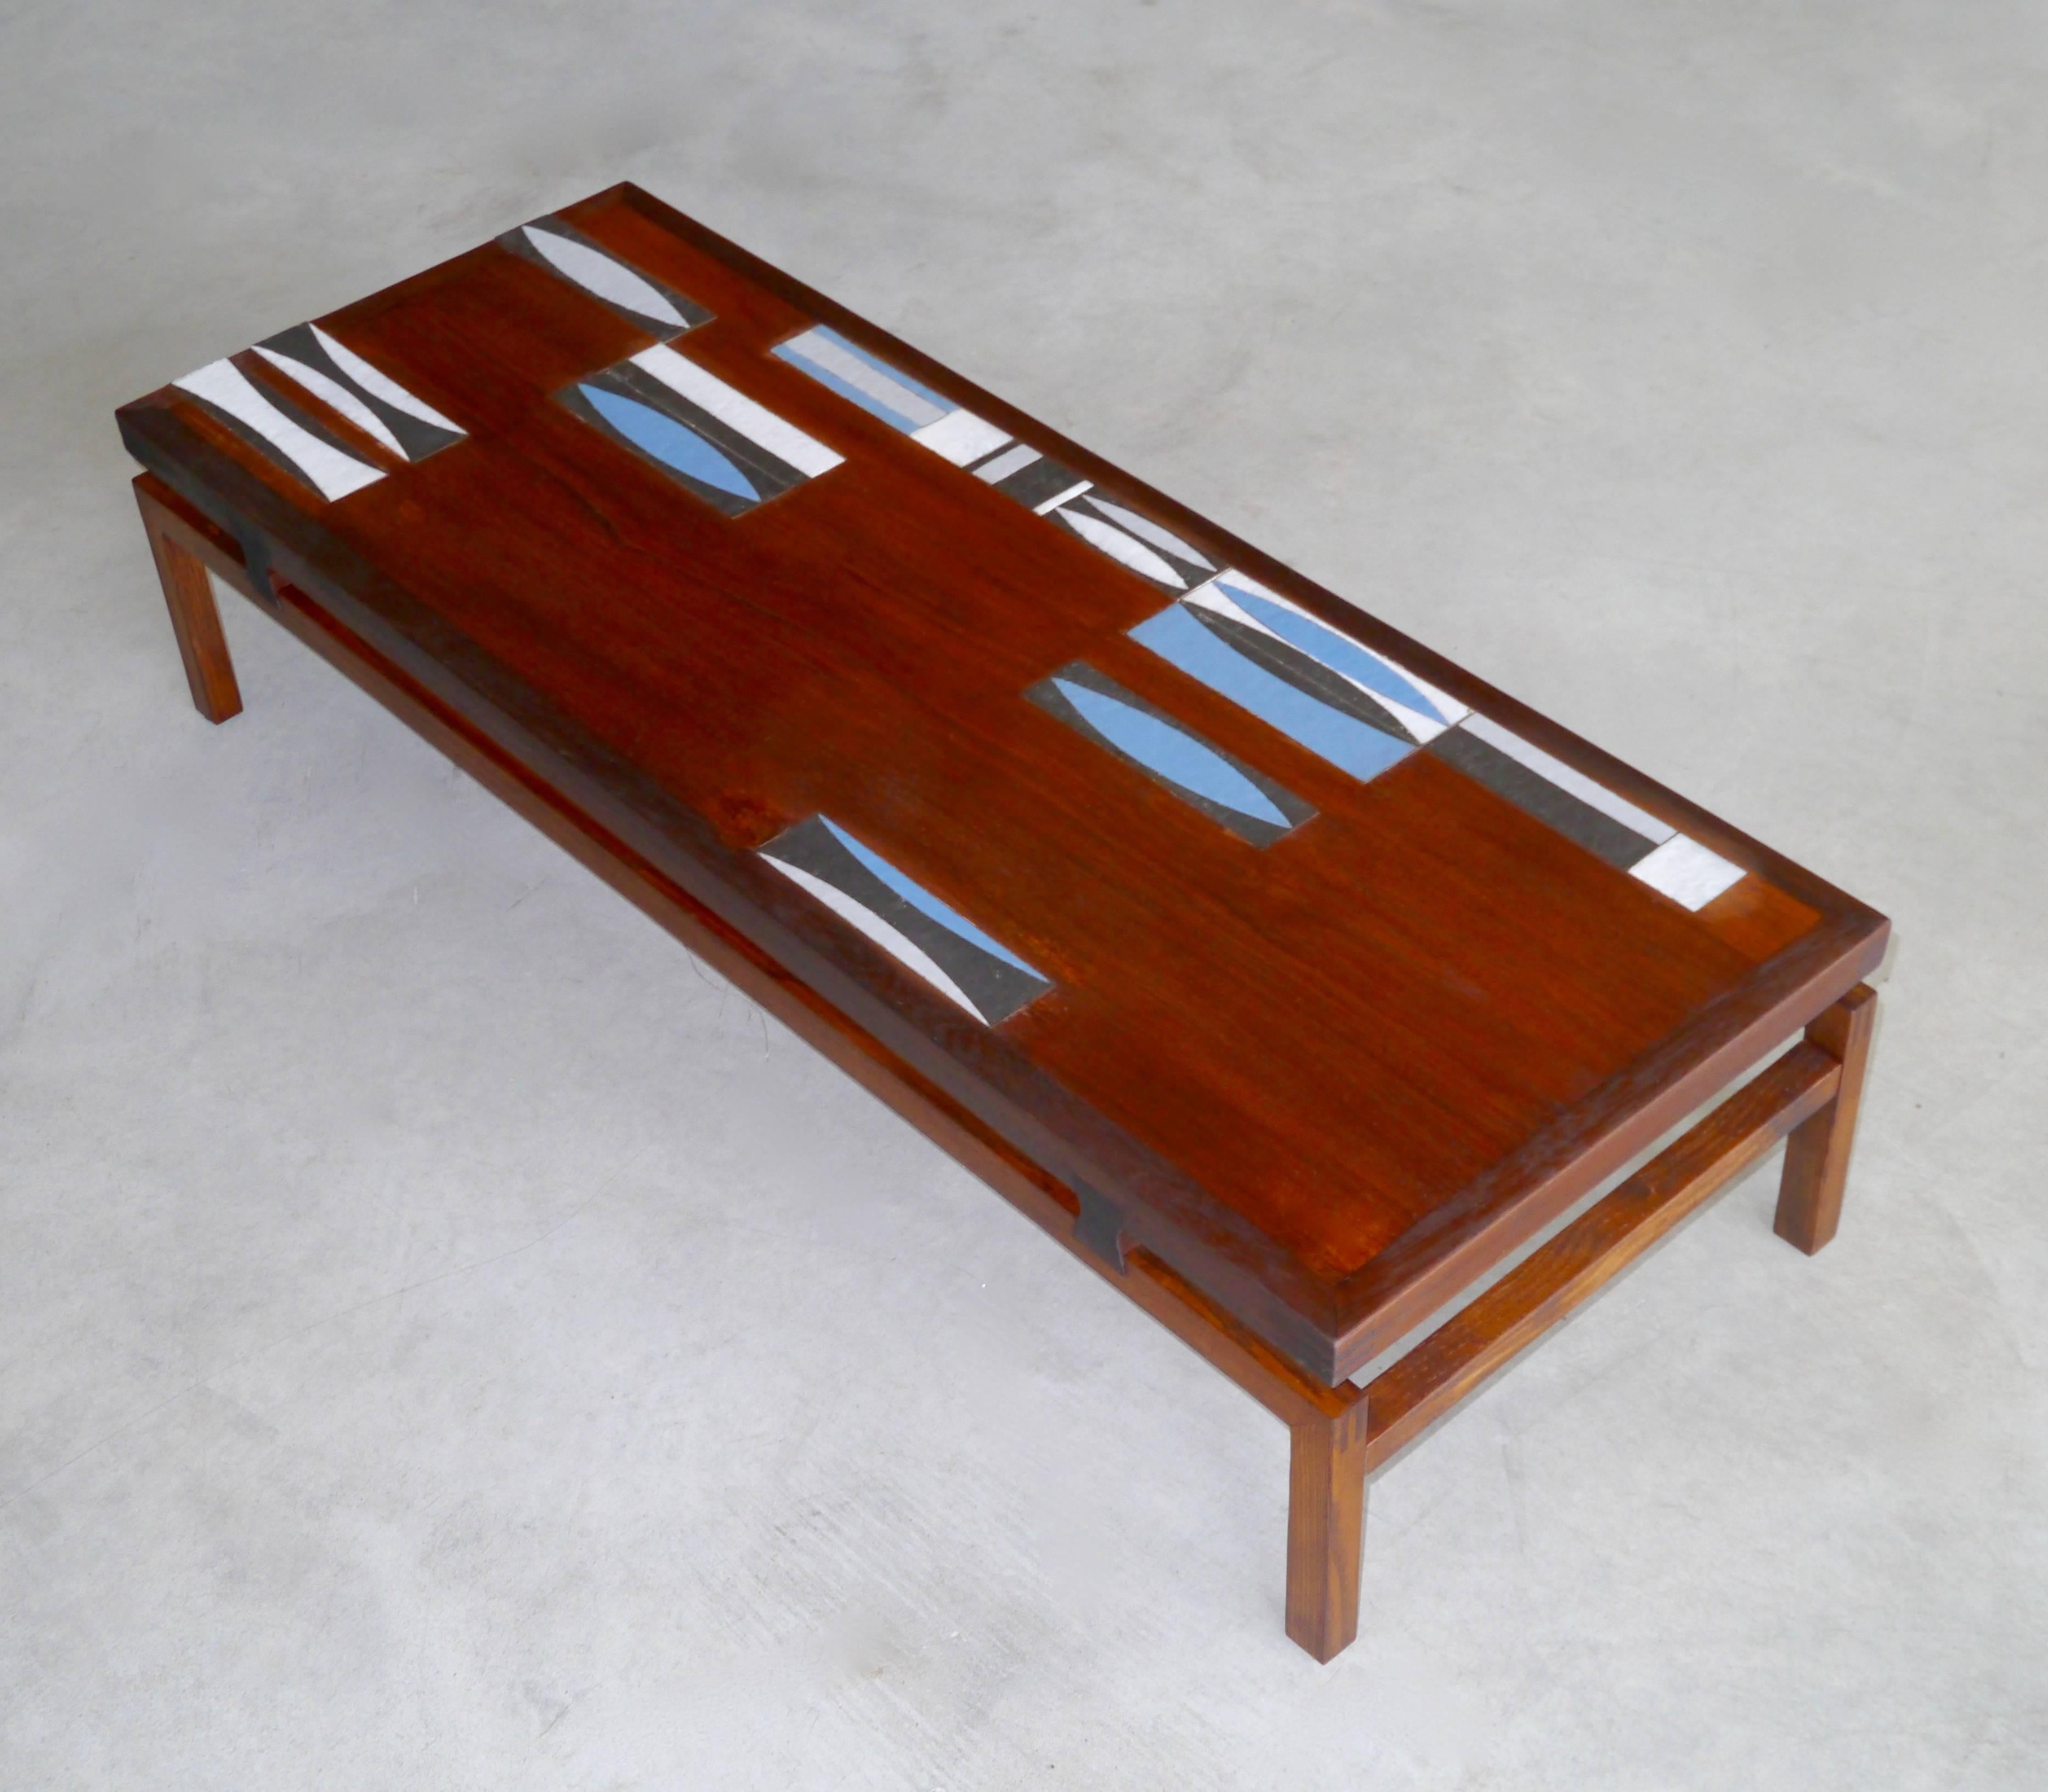 A very unusual example of Roger Capron's work realized in the early 1960s.
Mahogany wooden top and ceramic inlay.
Hand signature on one tile.